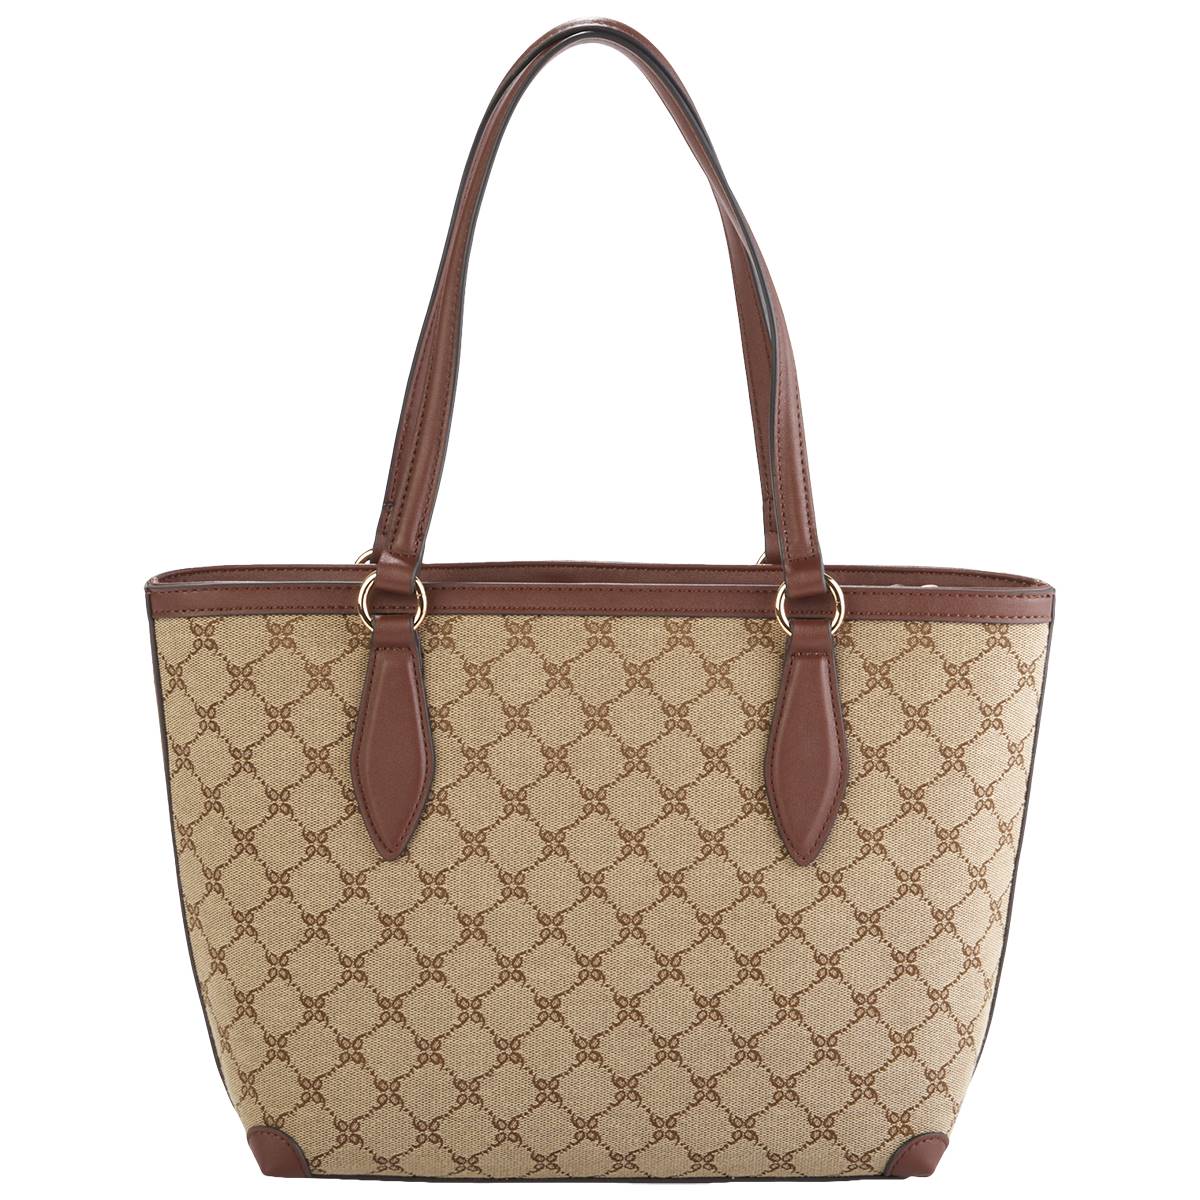 Nine West Kyelle Small Tote